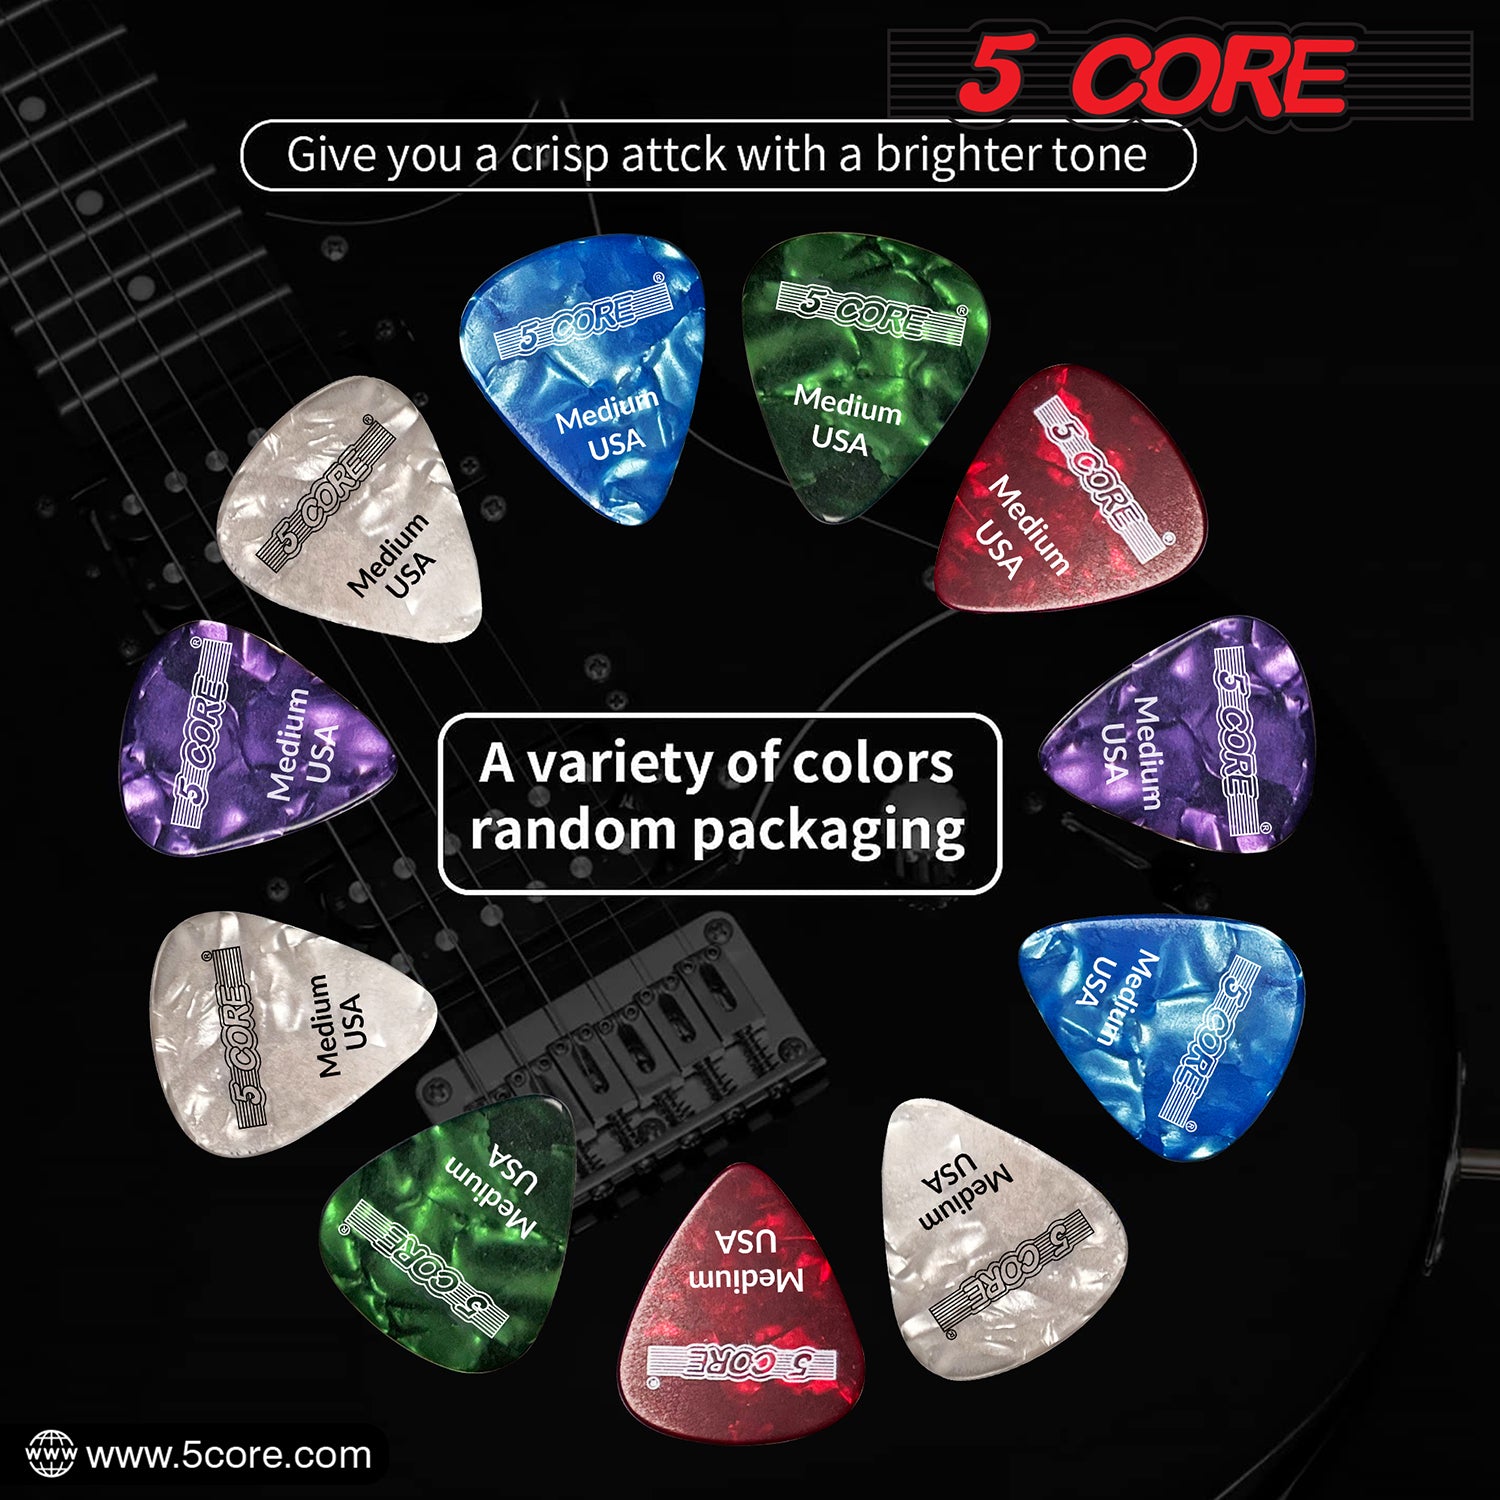 5 Core Celluloid Guitar Pick 12Pack Red Medium Gauge Plectrums for Acoustic Electric Bass Guitar